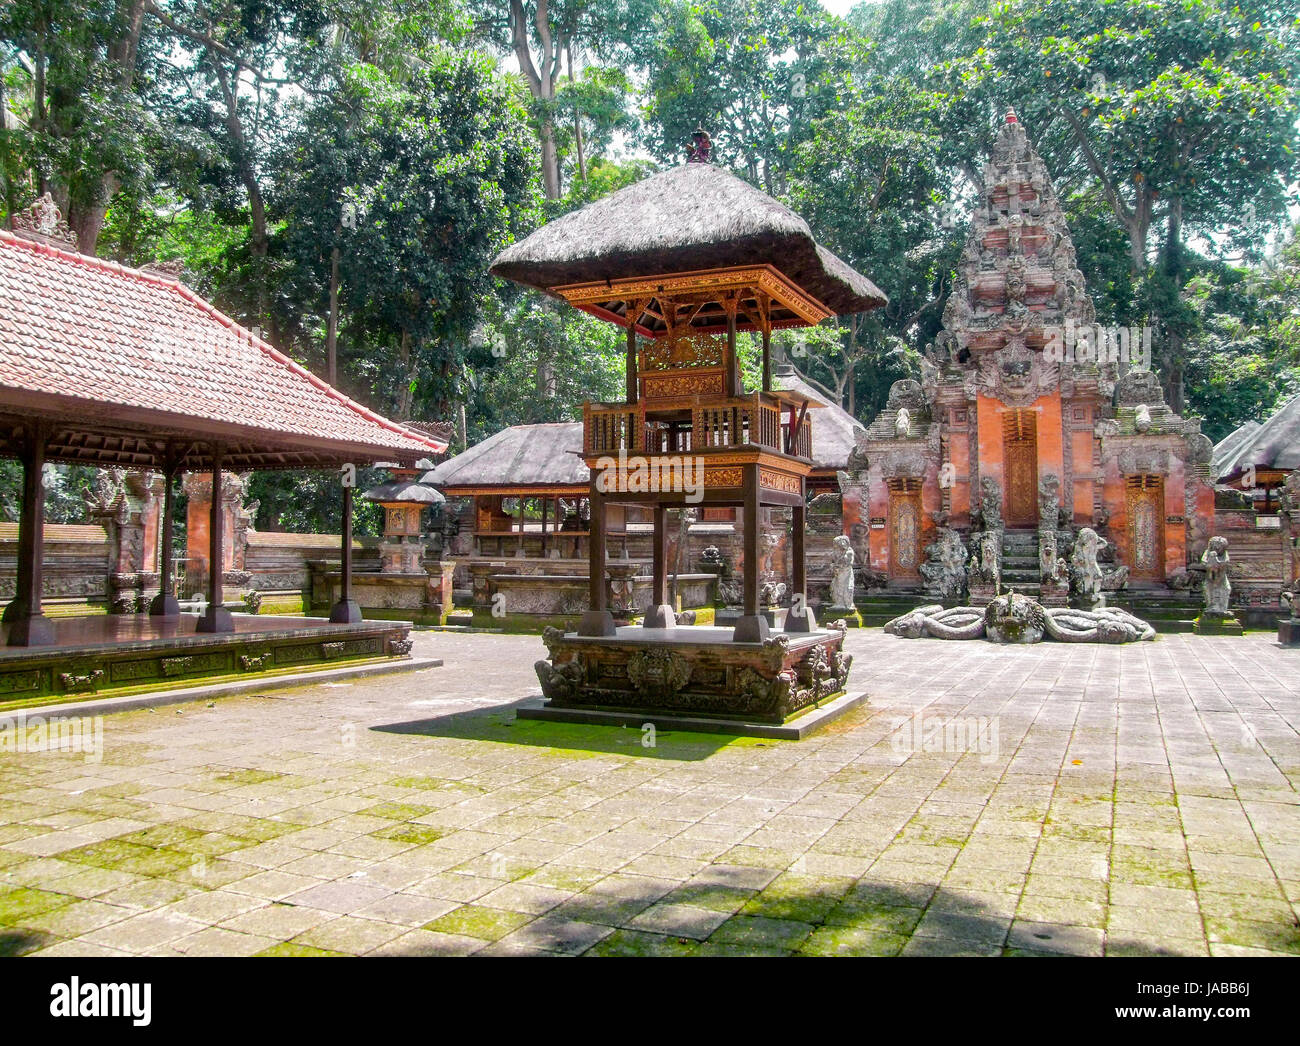 indonesian temple in sunny ambiance Stock Photo